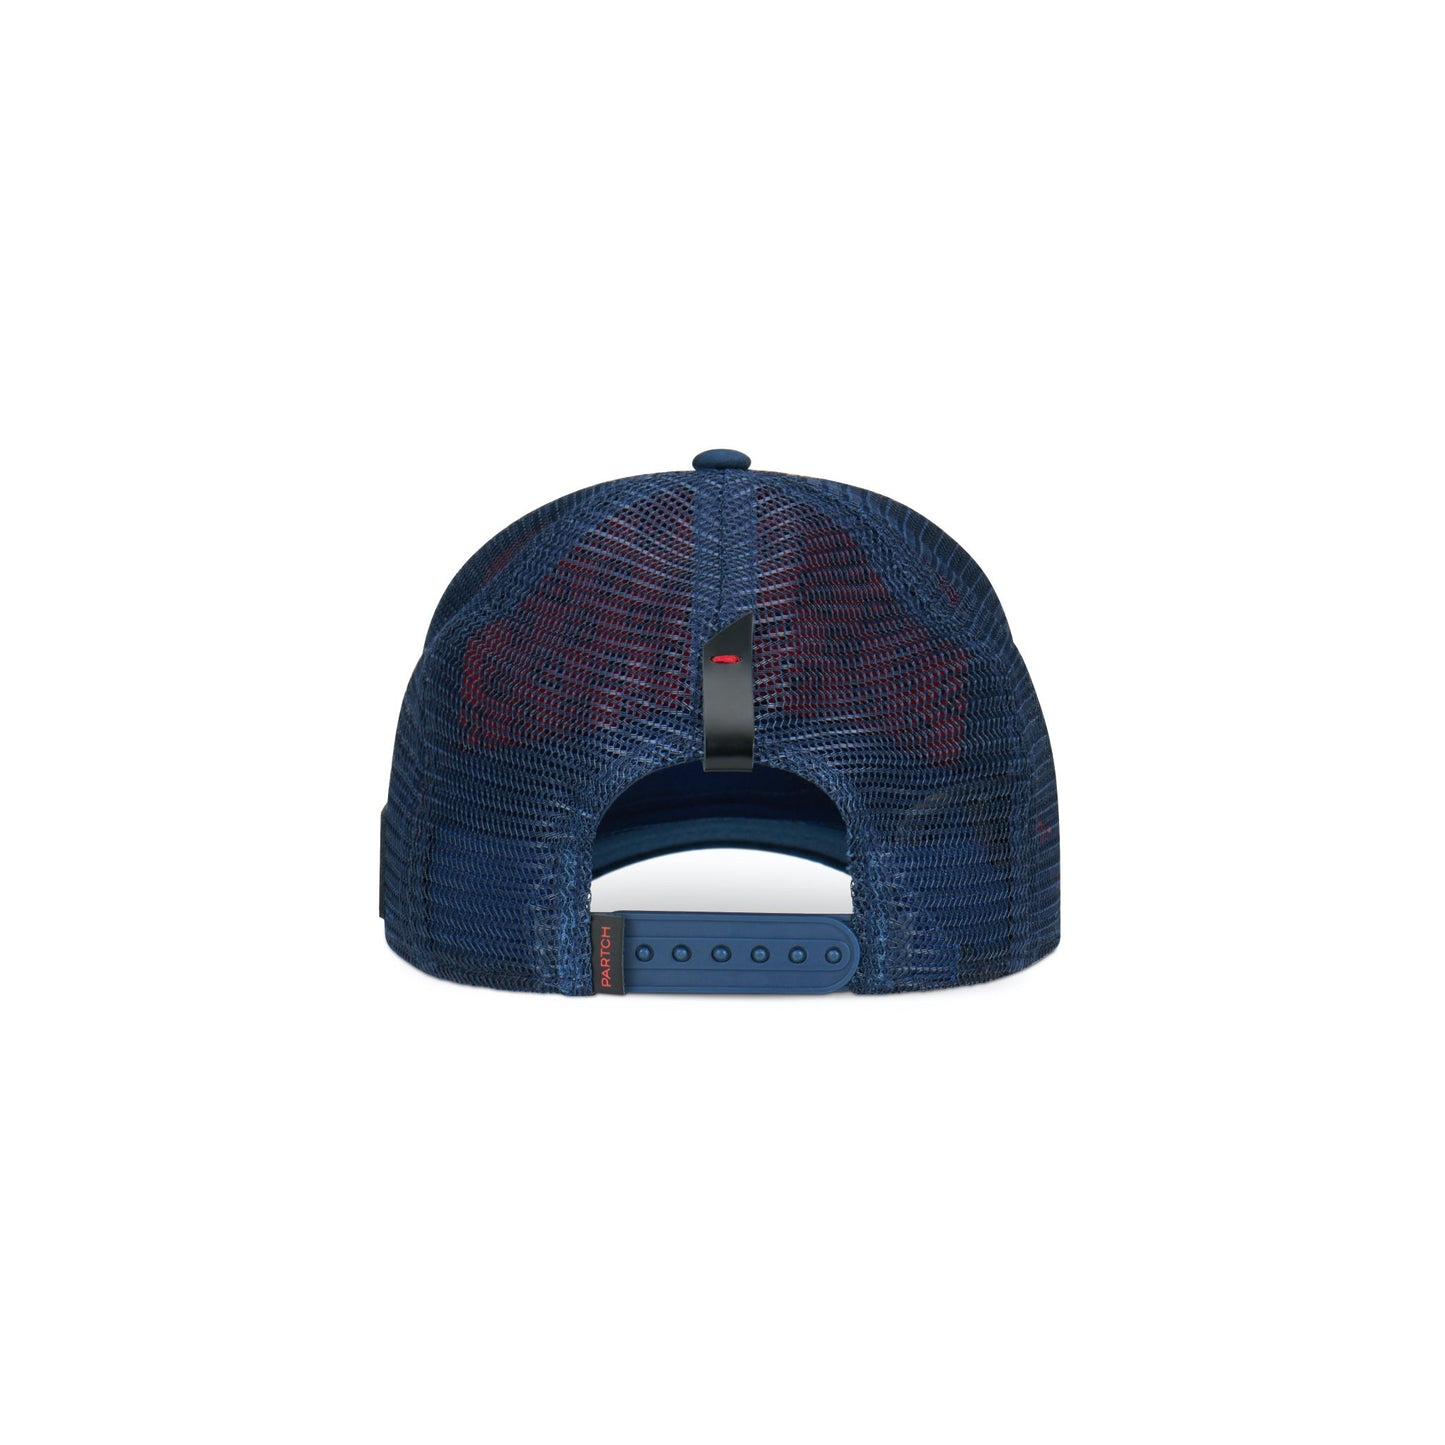 Partch Trucker Hat Navy Blue with PARTCH-Clip DWYL-B77 Back View